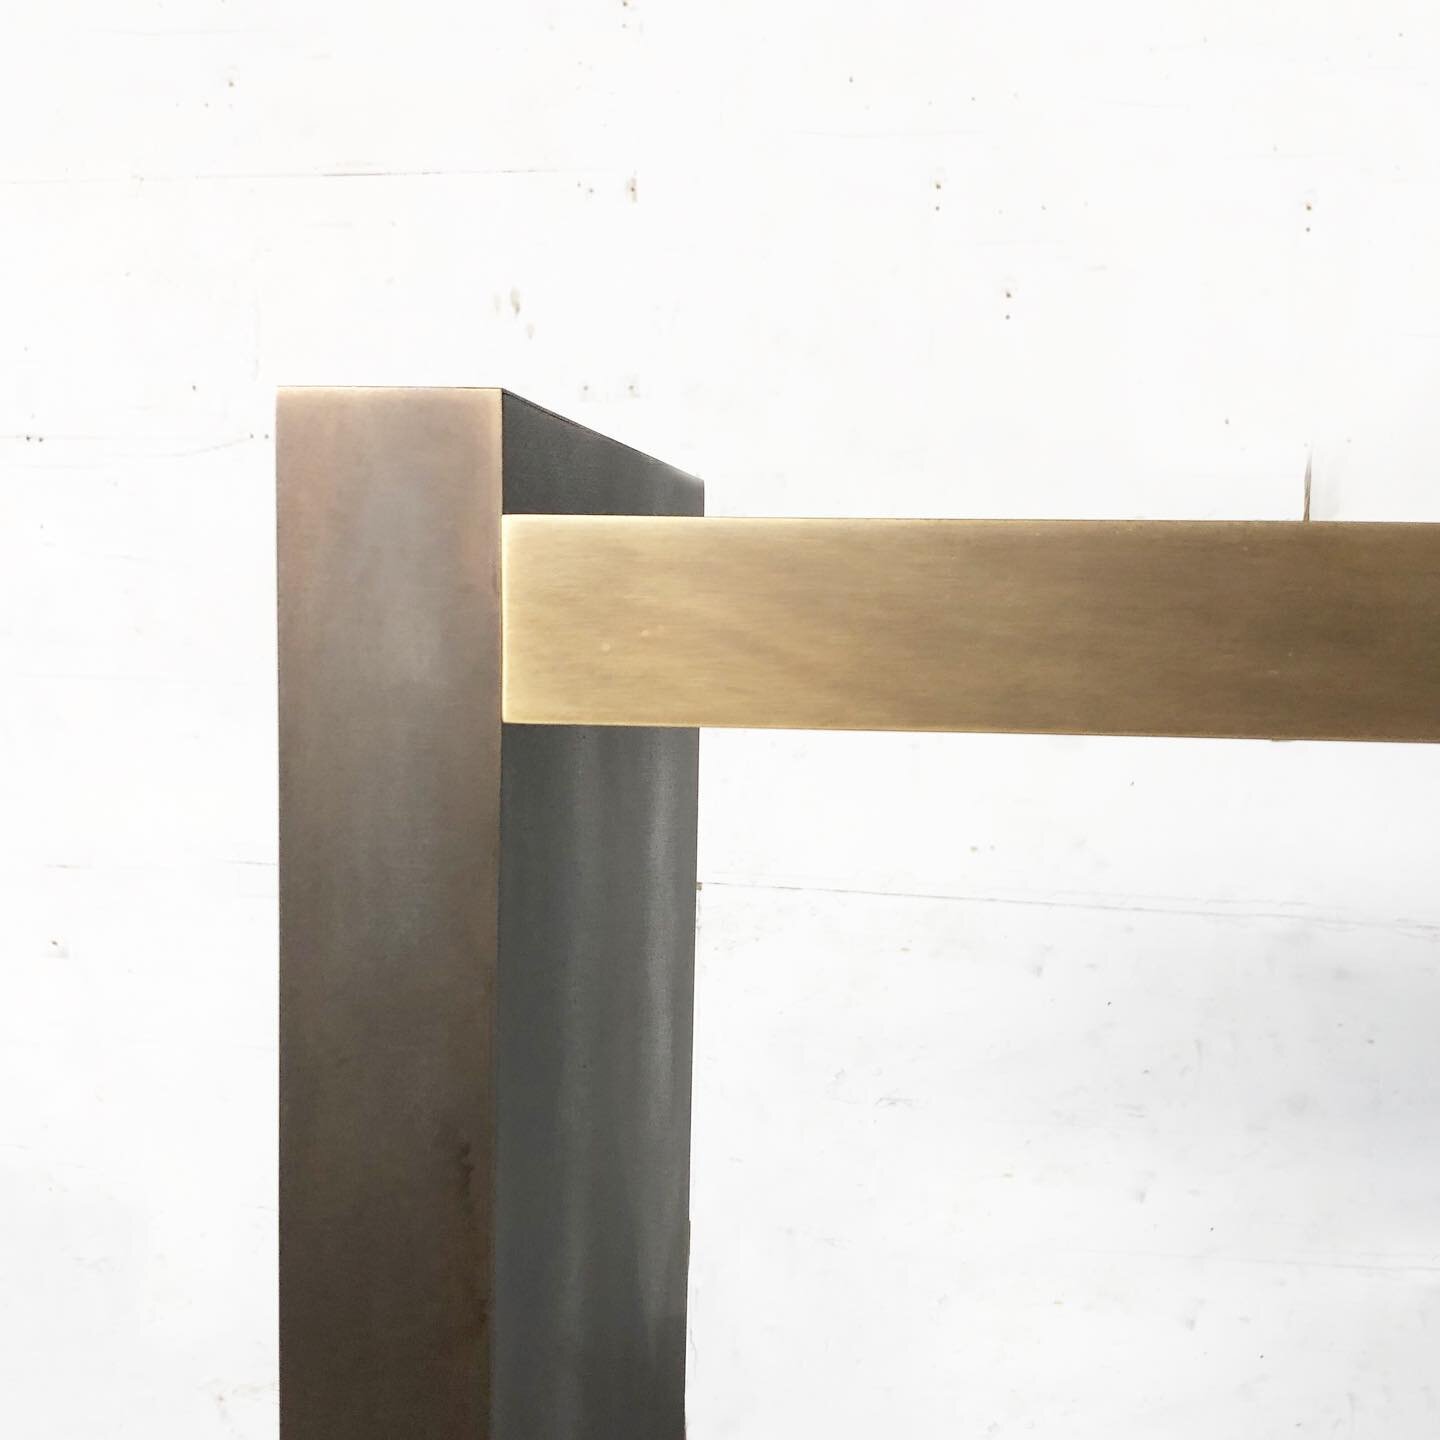 Juxtaposition. Two finishes come together in a very geometric console table. Really happy with how this one turned out. ..... ...... #furniture #ffe #brooklyn #hand #finish #antiqued #architectural #bronze #oil #rubbed #handmade #geometry #simple #sa